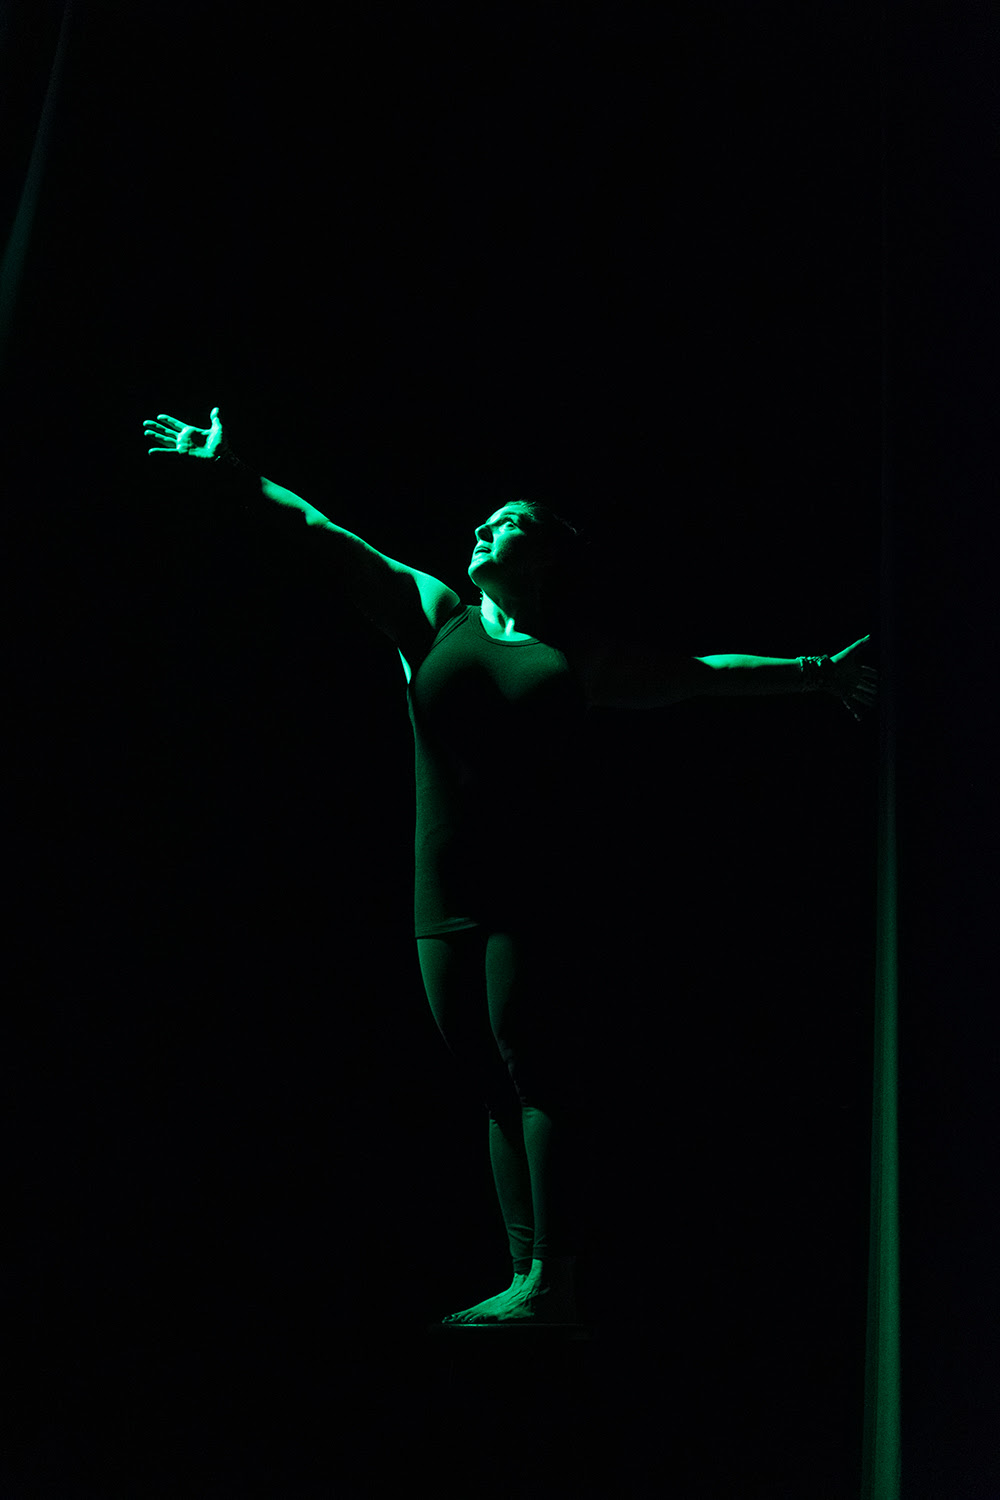 Sara Juli under green light reaches arms out and twists upper body.